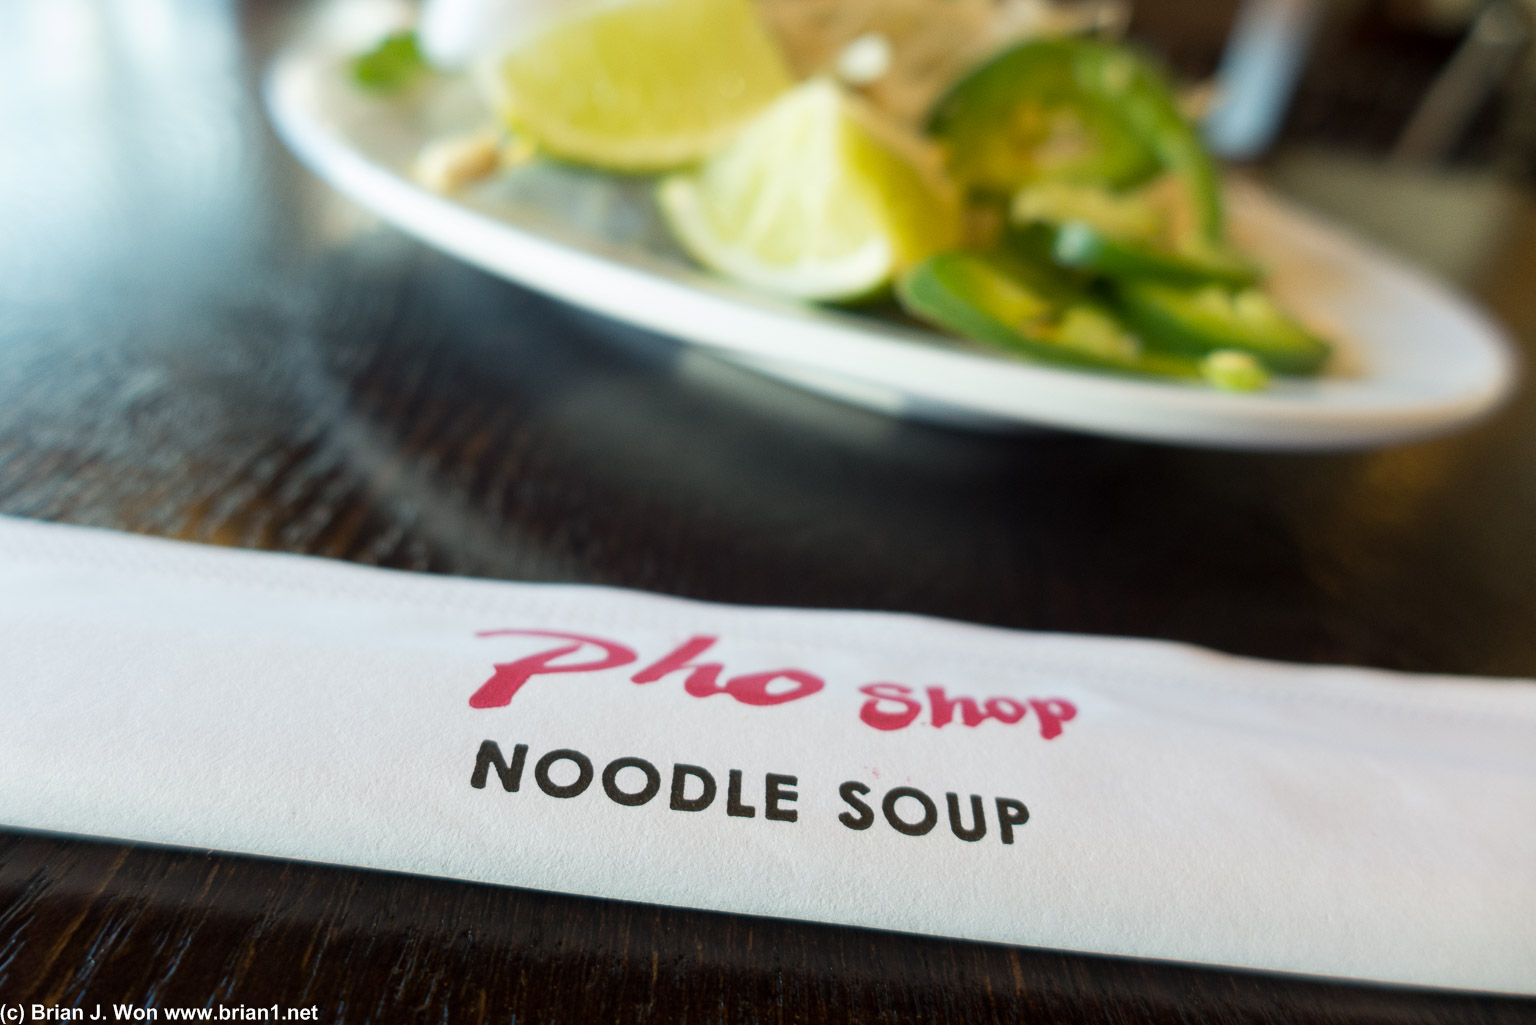 It really is called Pho Shop.